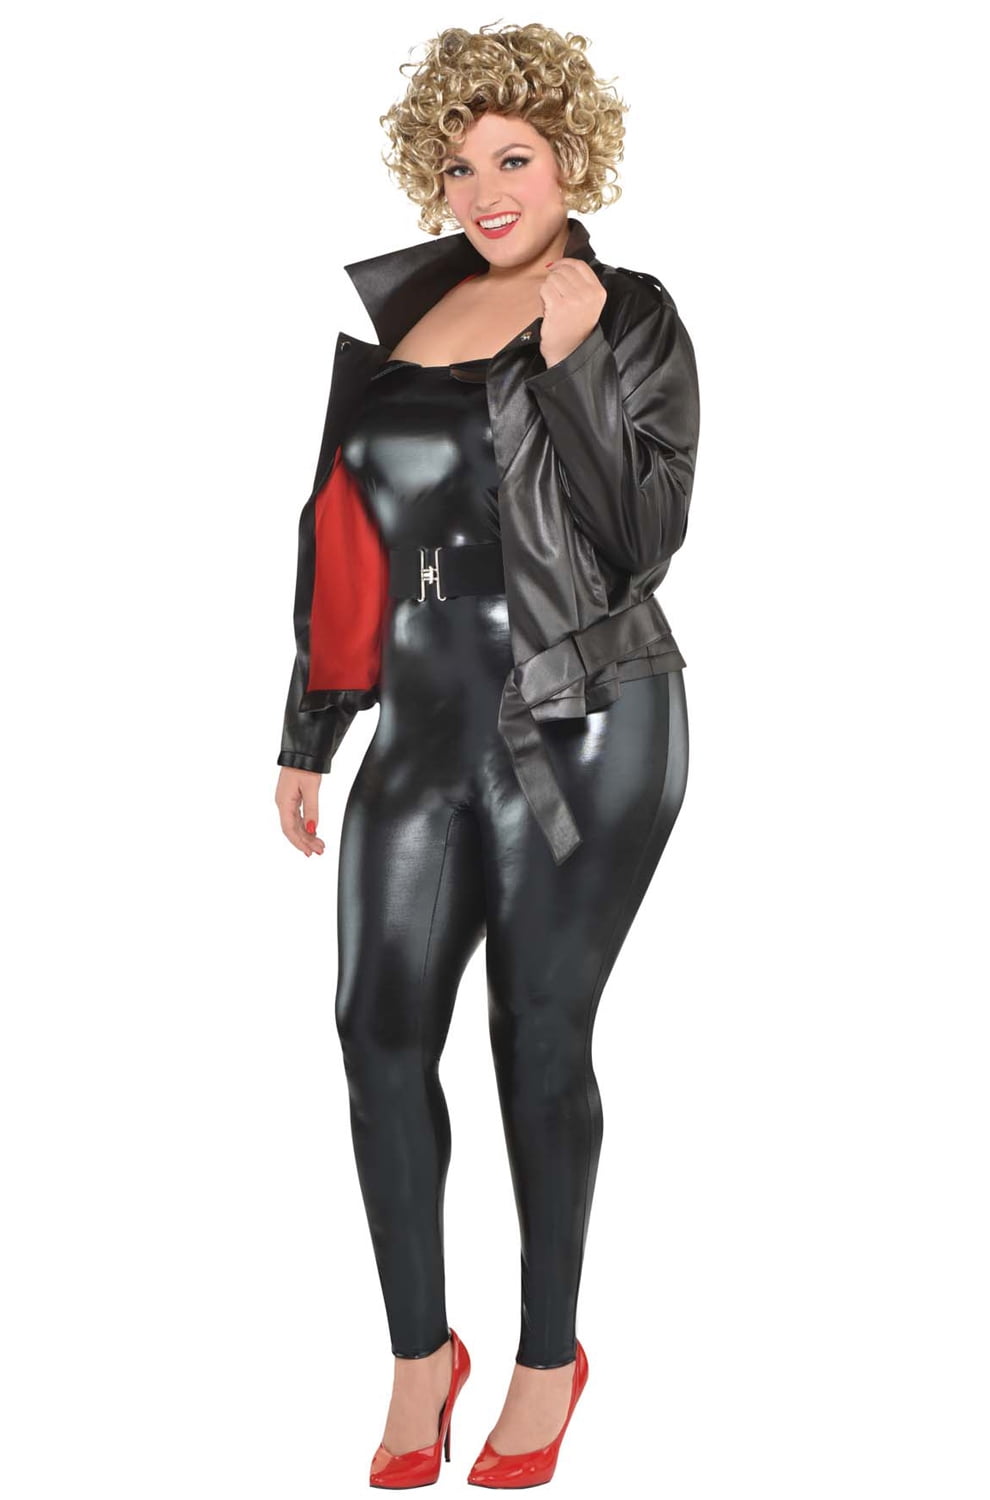 Grease Greaser Plus Size Costume - Walmart.com